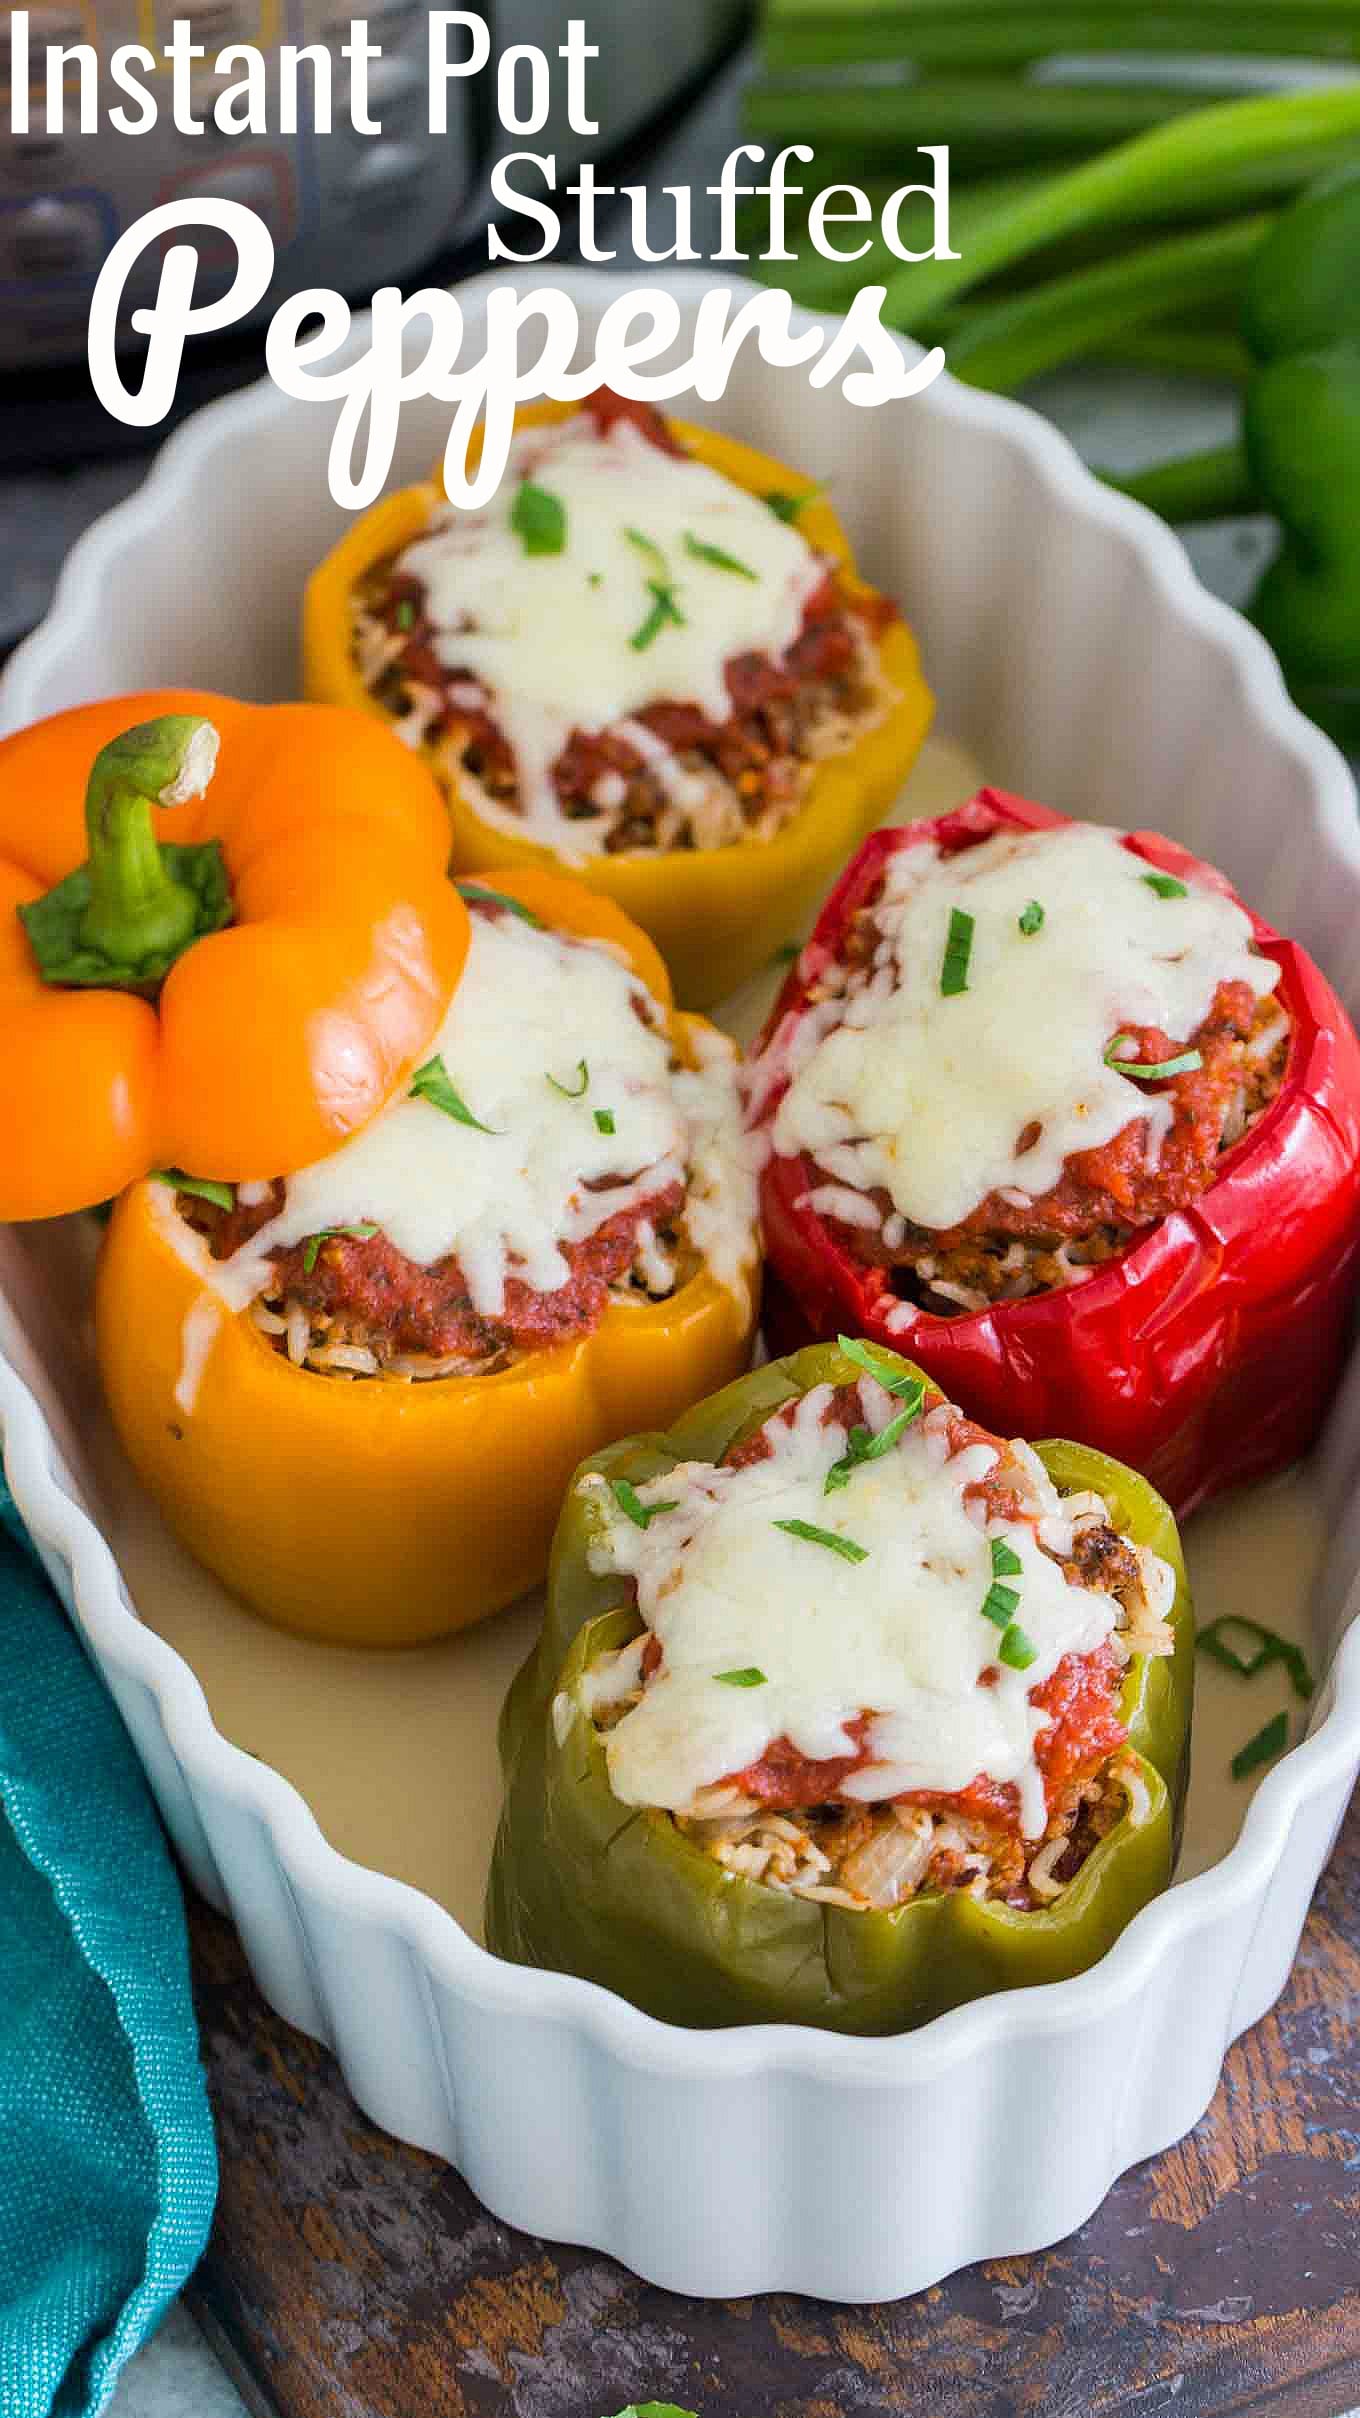 Instant Pot Stuffed Peppers Recipe [VIDEO] - Sweet and Savory Meals